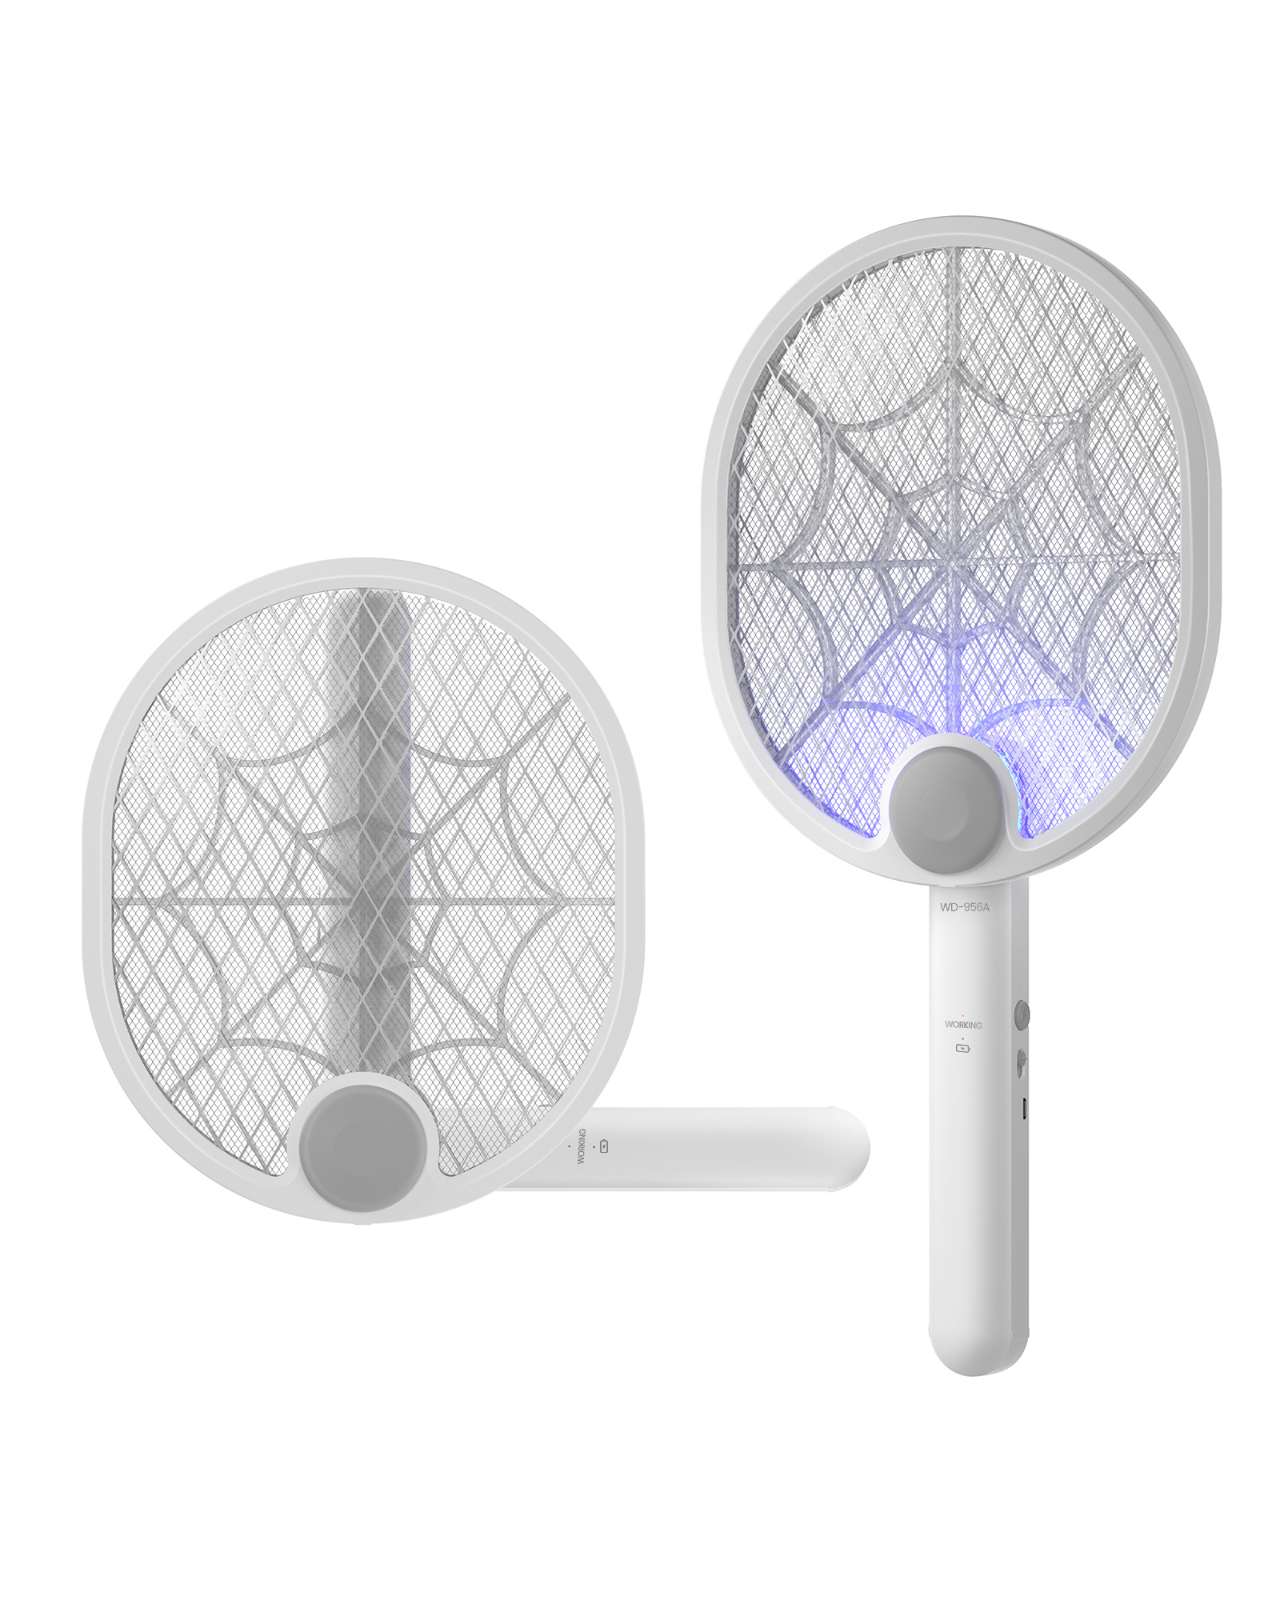 Buzbug WD-956A Electric Mosquito Swatter